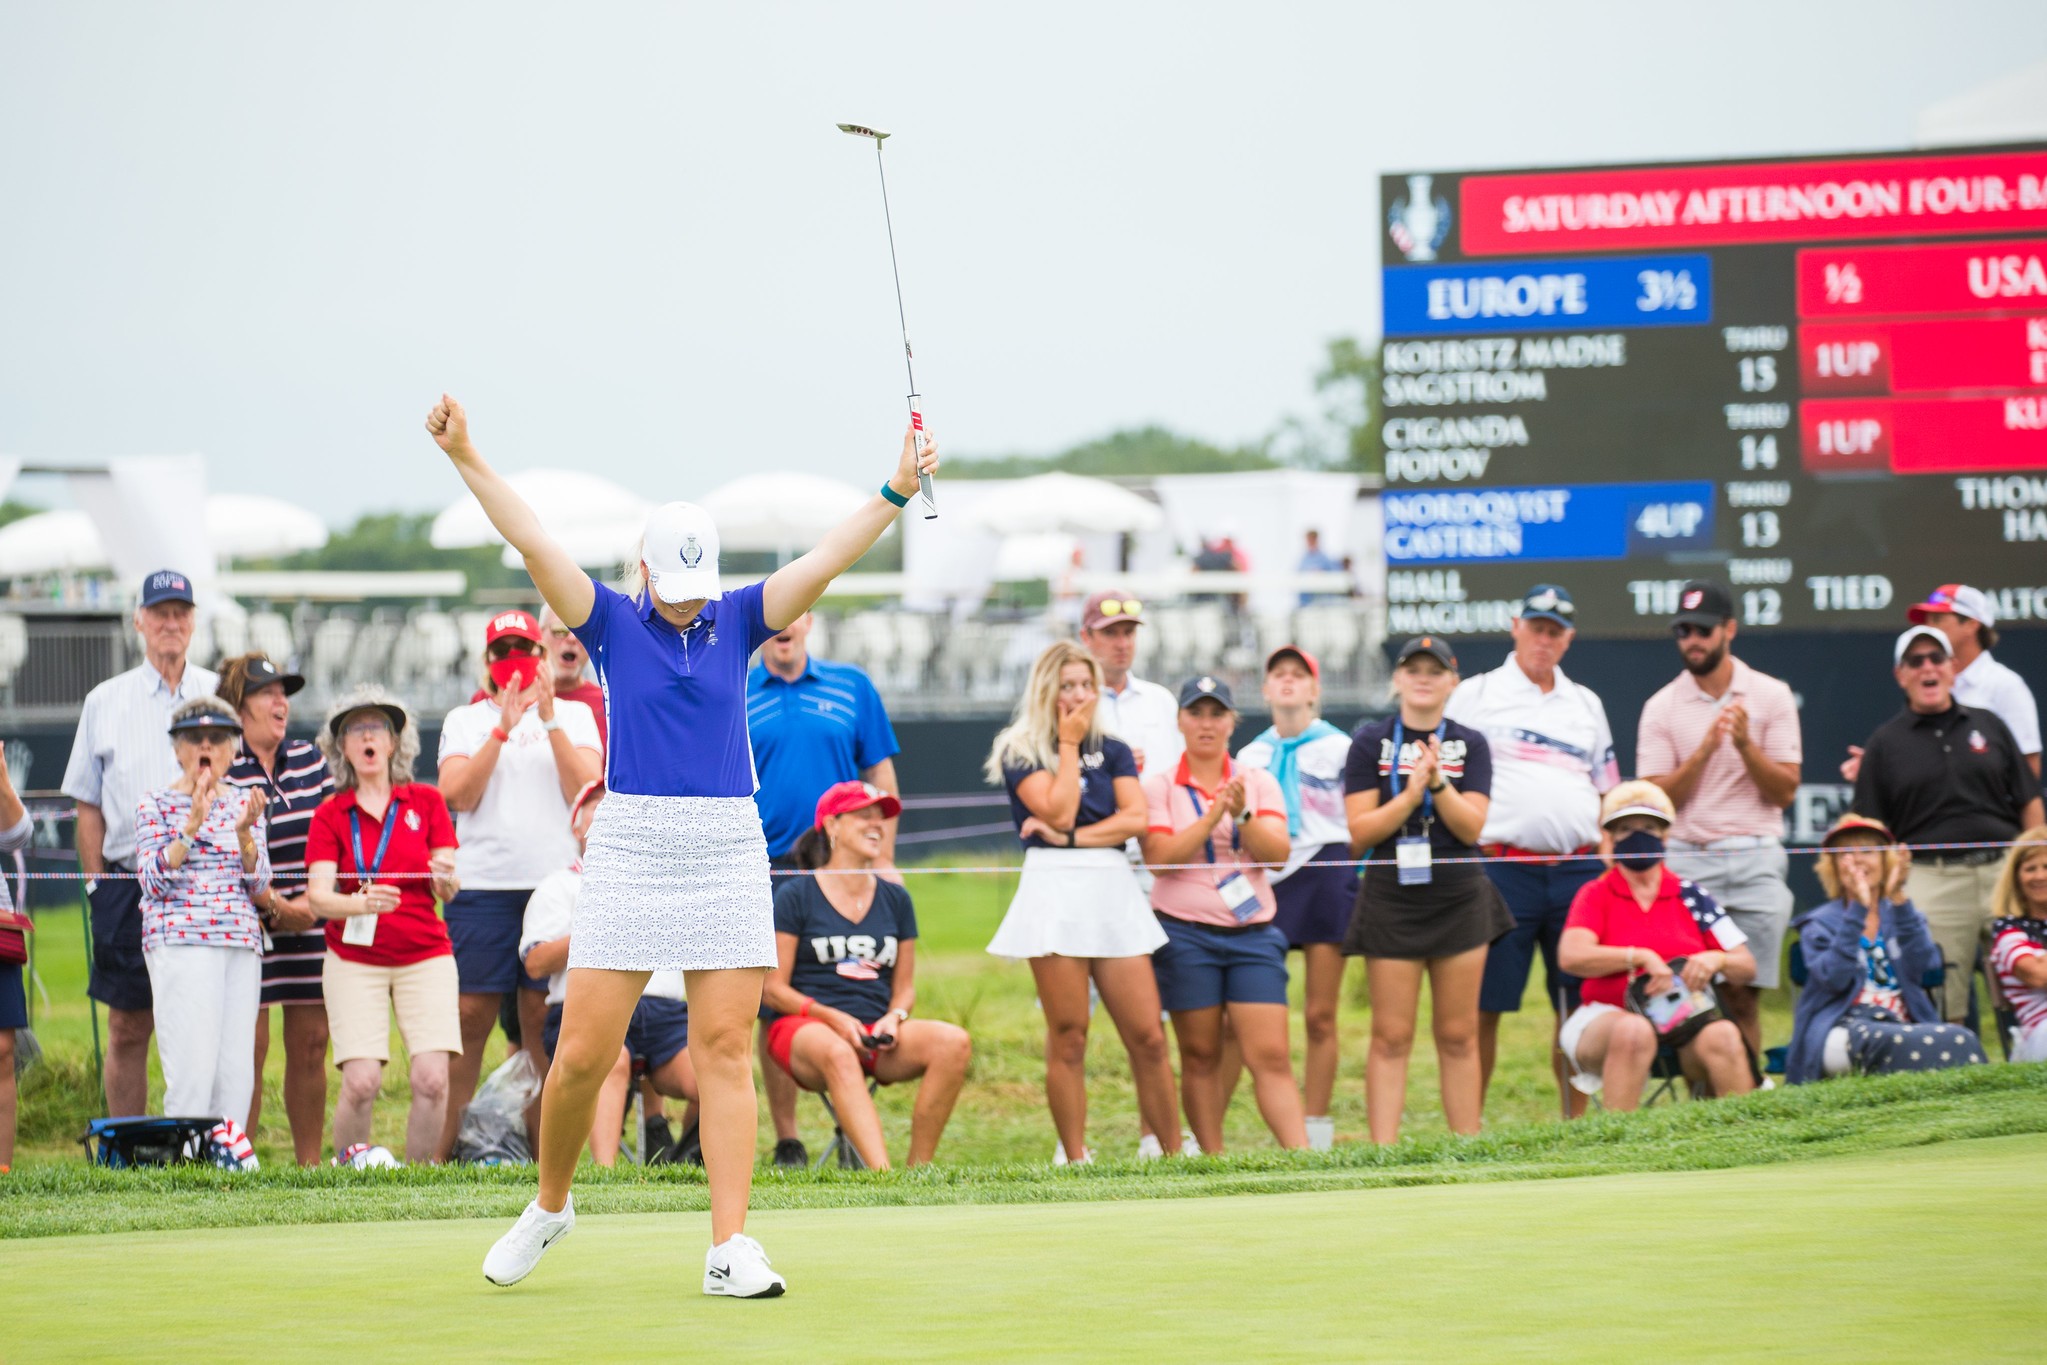 Team Europe by 3 points heading into day two  2021 Solheim Cup